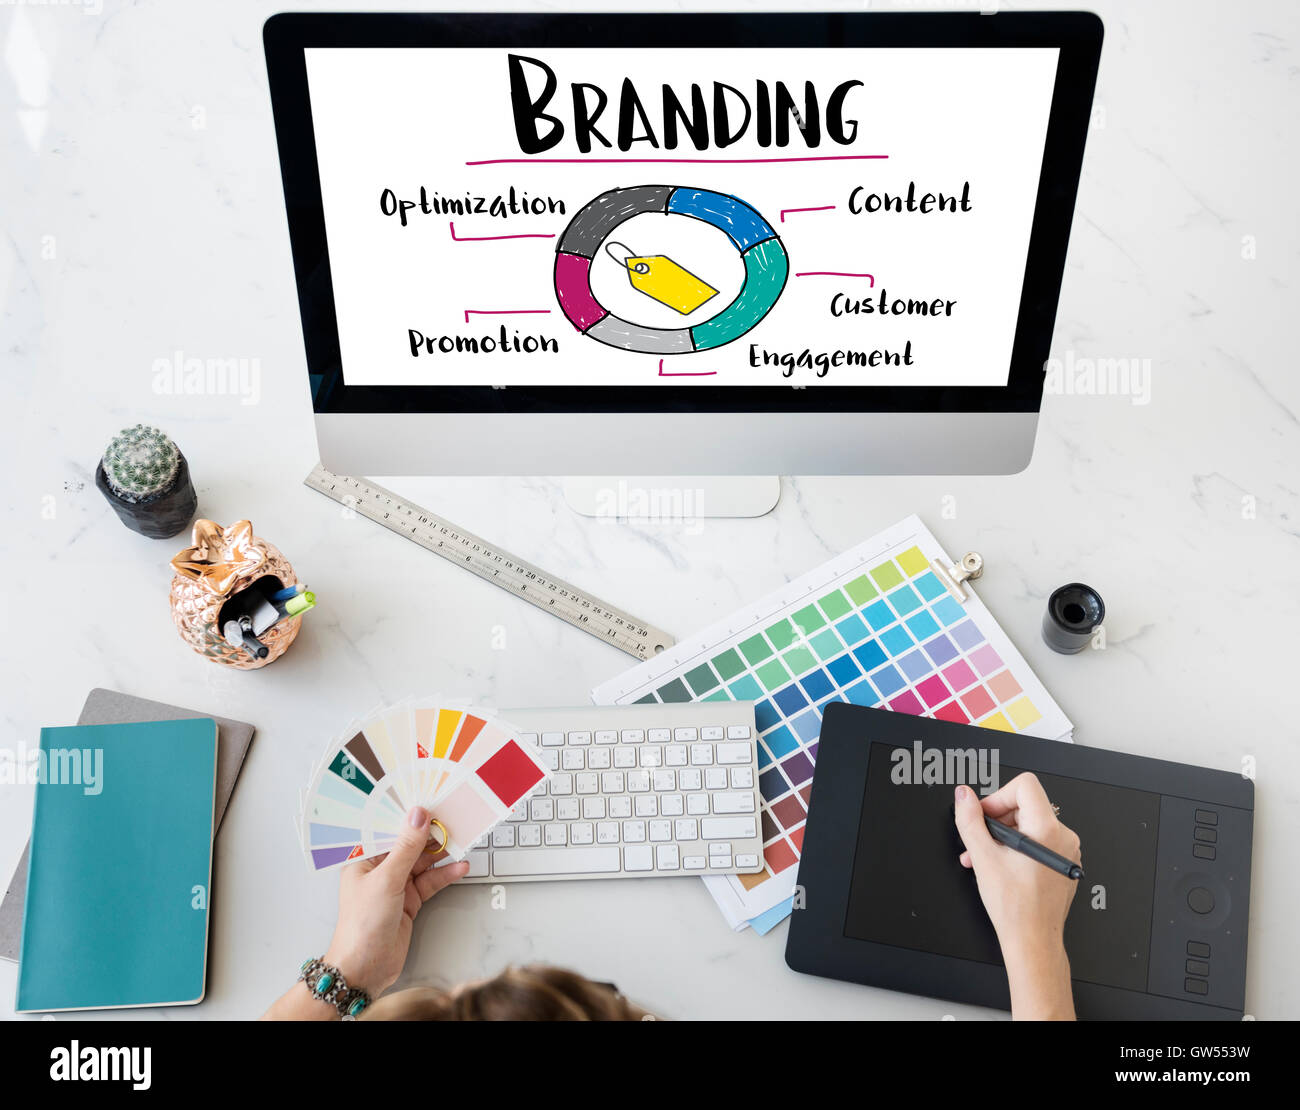 Branding Promotion Commercial Marketing Advertising Concept Stock Photo